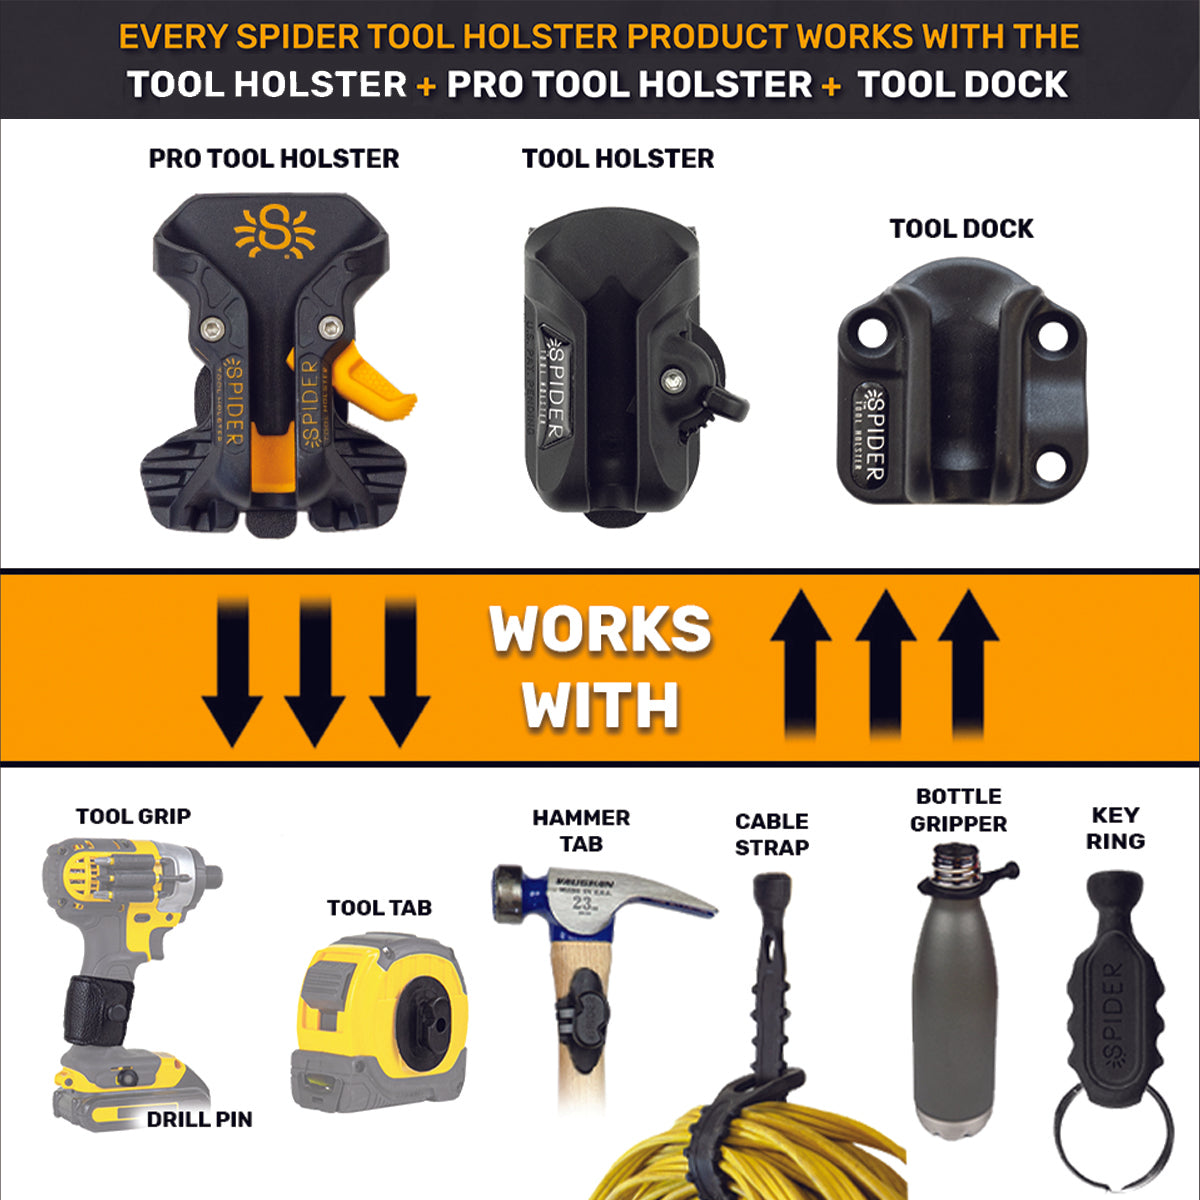 Pro Tool Holster